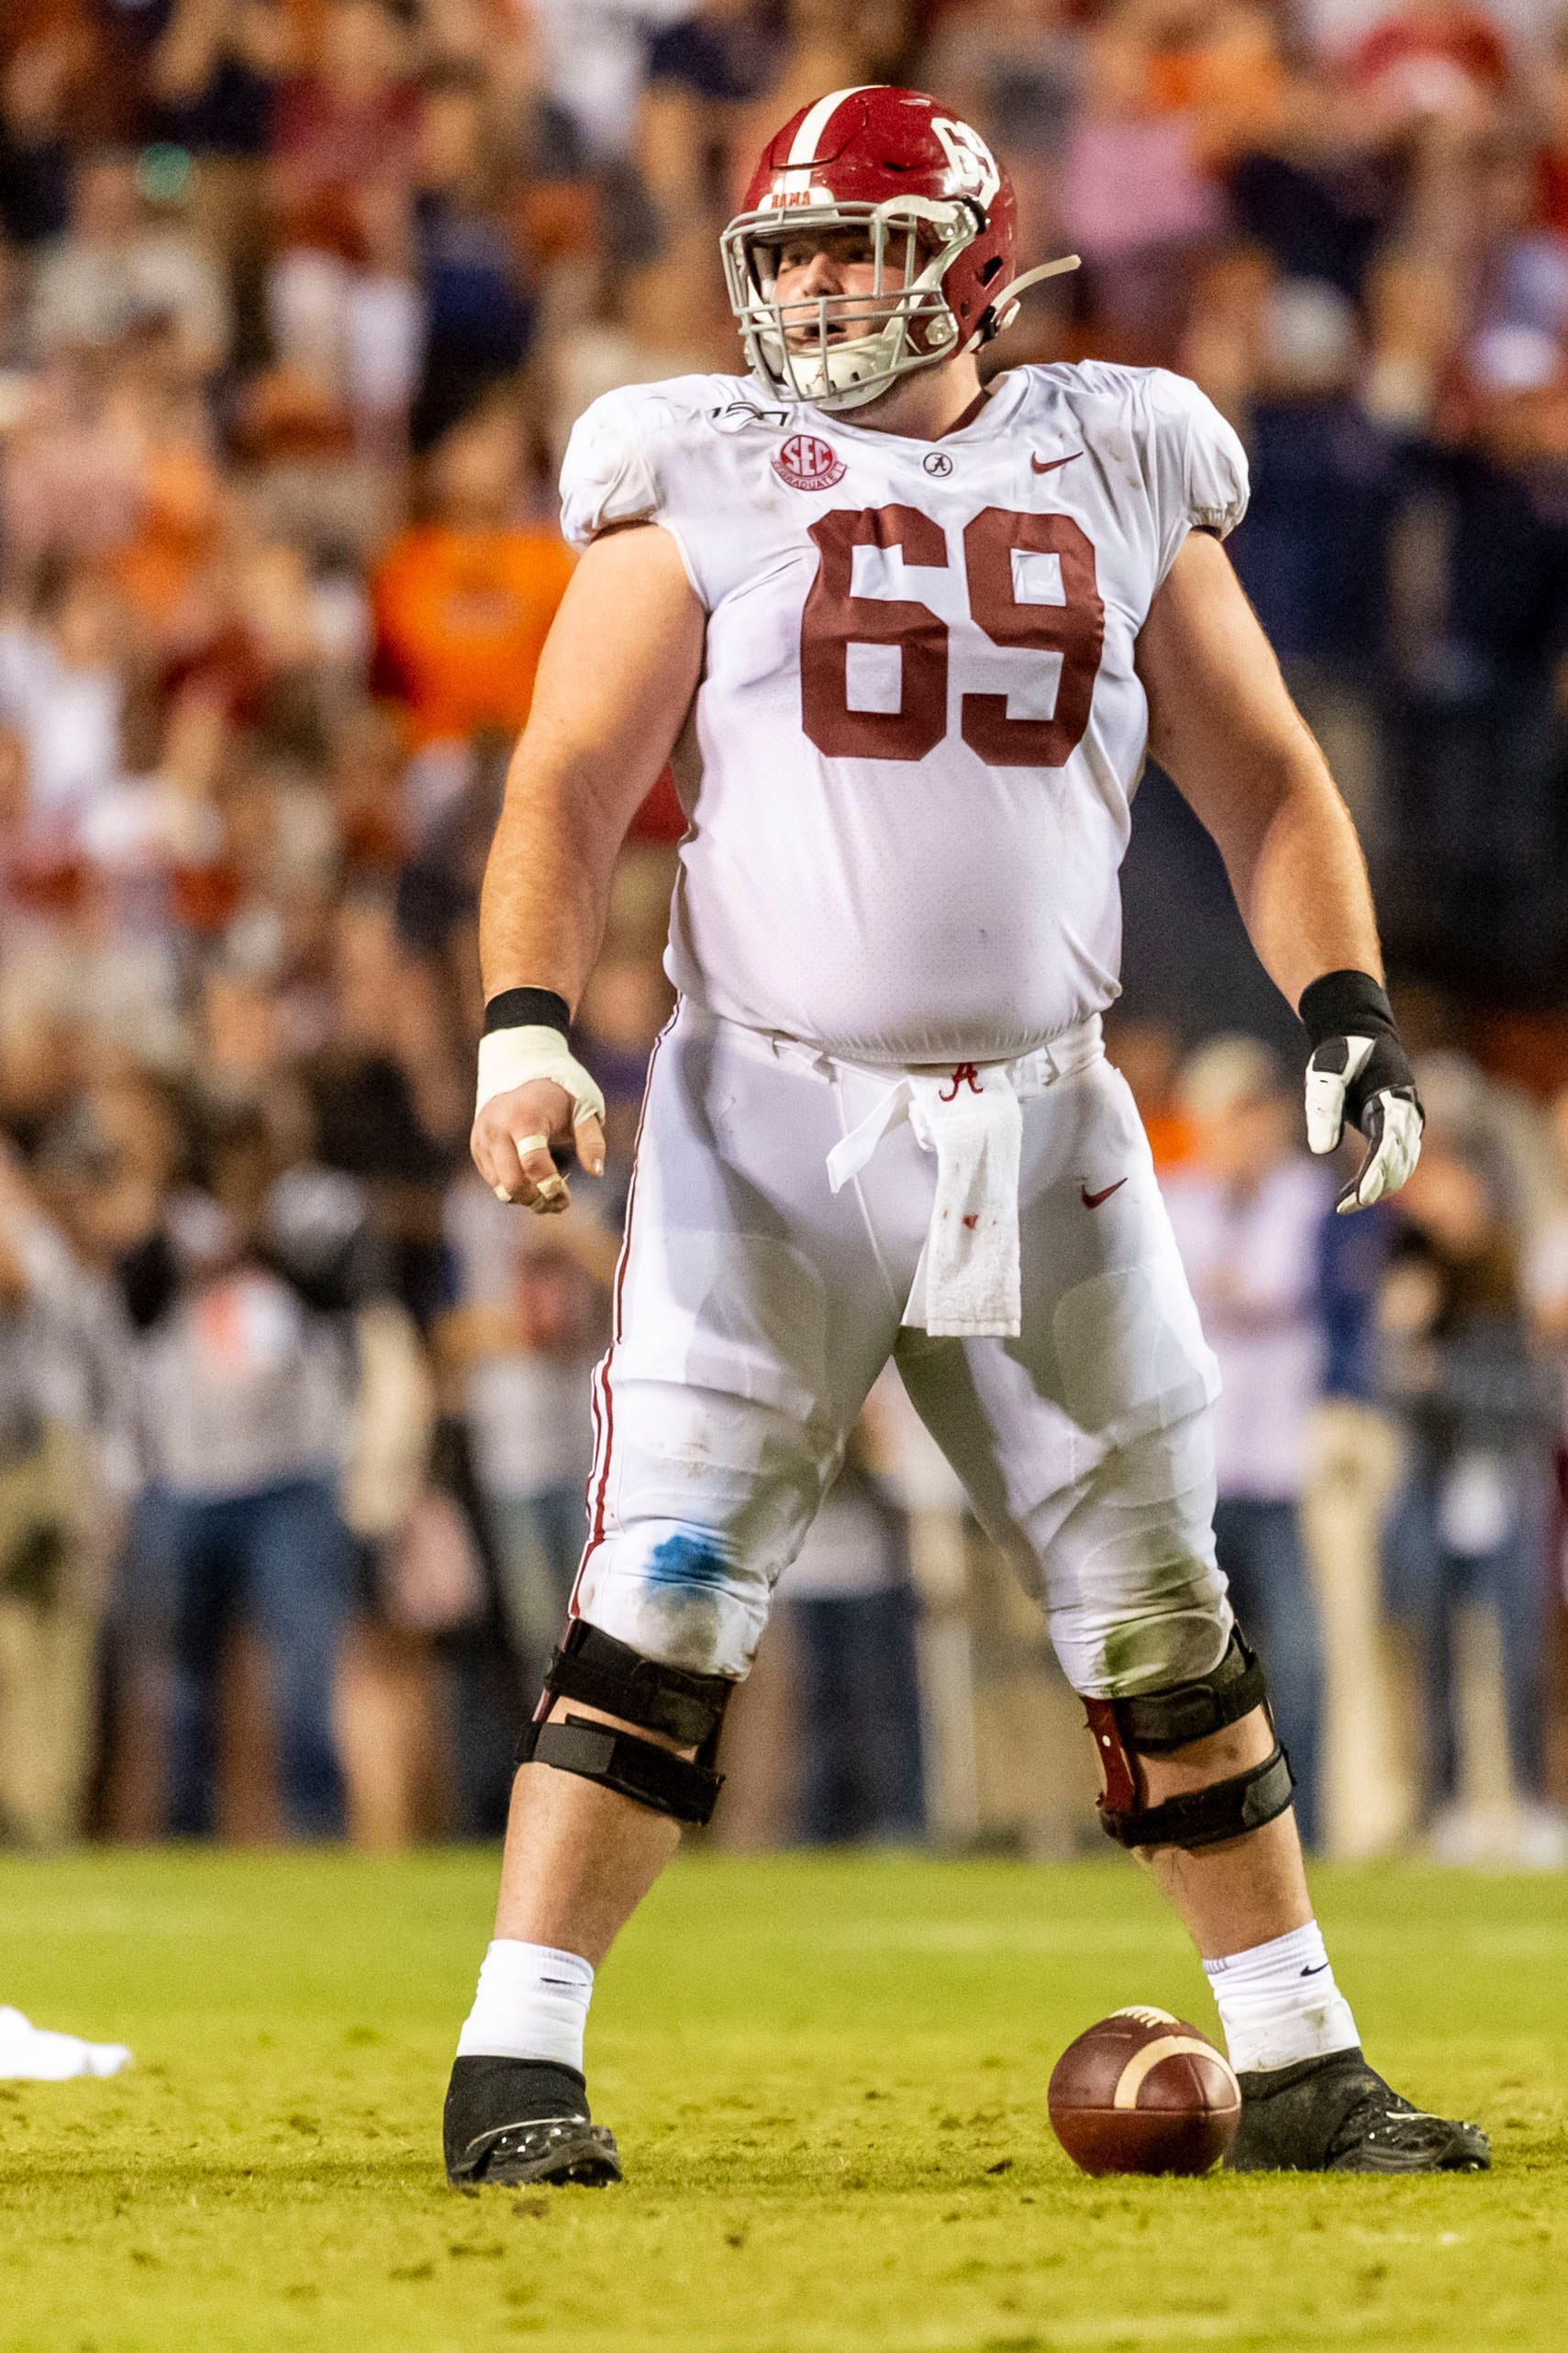 Alabama offensive lineman Landon Dickerson (69) step up to the line against Auburn during the second half of an NCAA college football game, Saturday, Nov. 30, 2019, in Auburn, Ala. (AP Photo/Vasha Hunt)